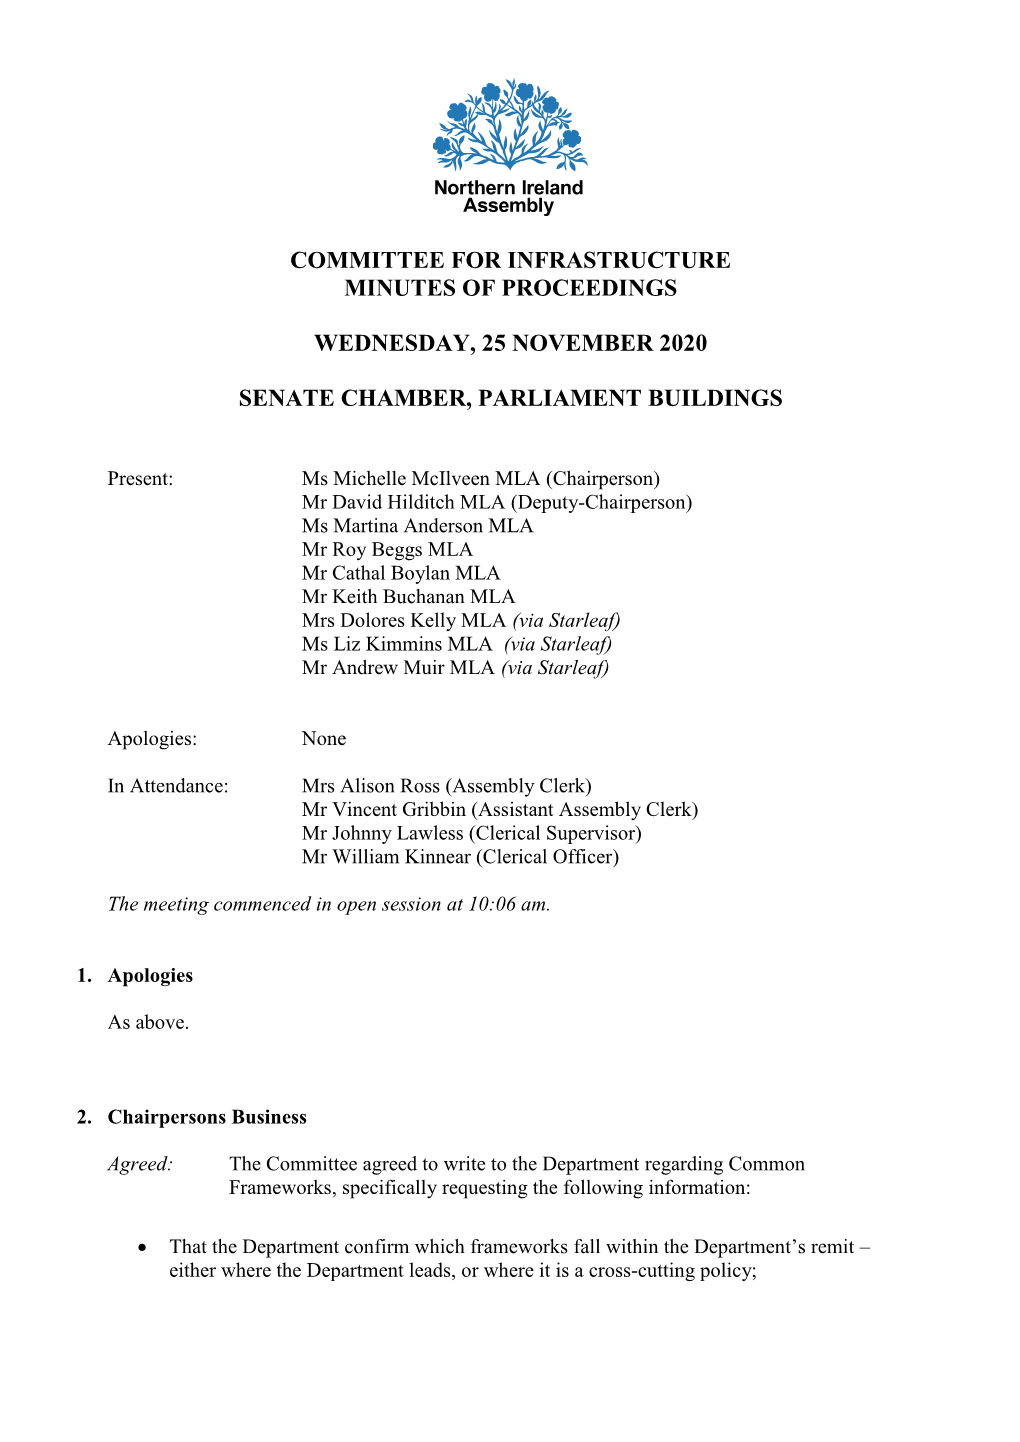 Committee for Infrastructure Minutes of Proceedings